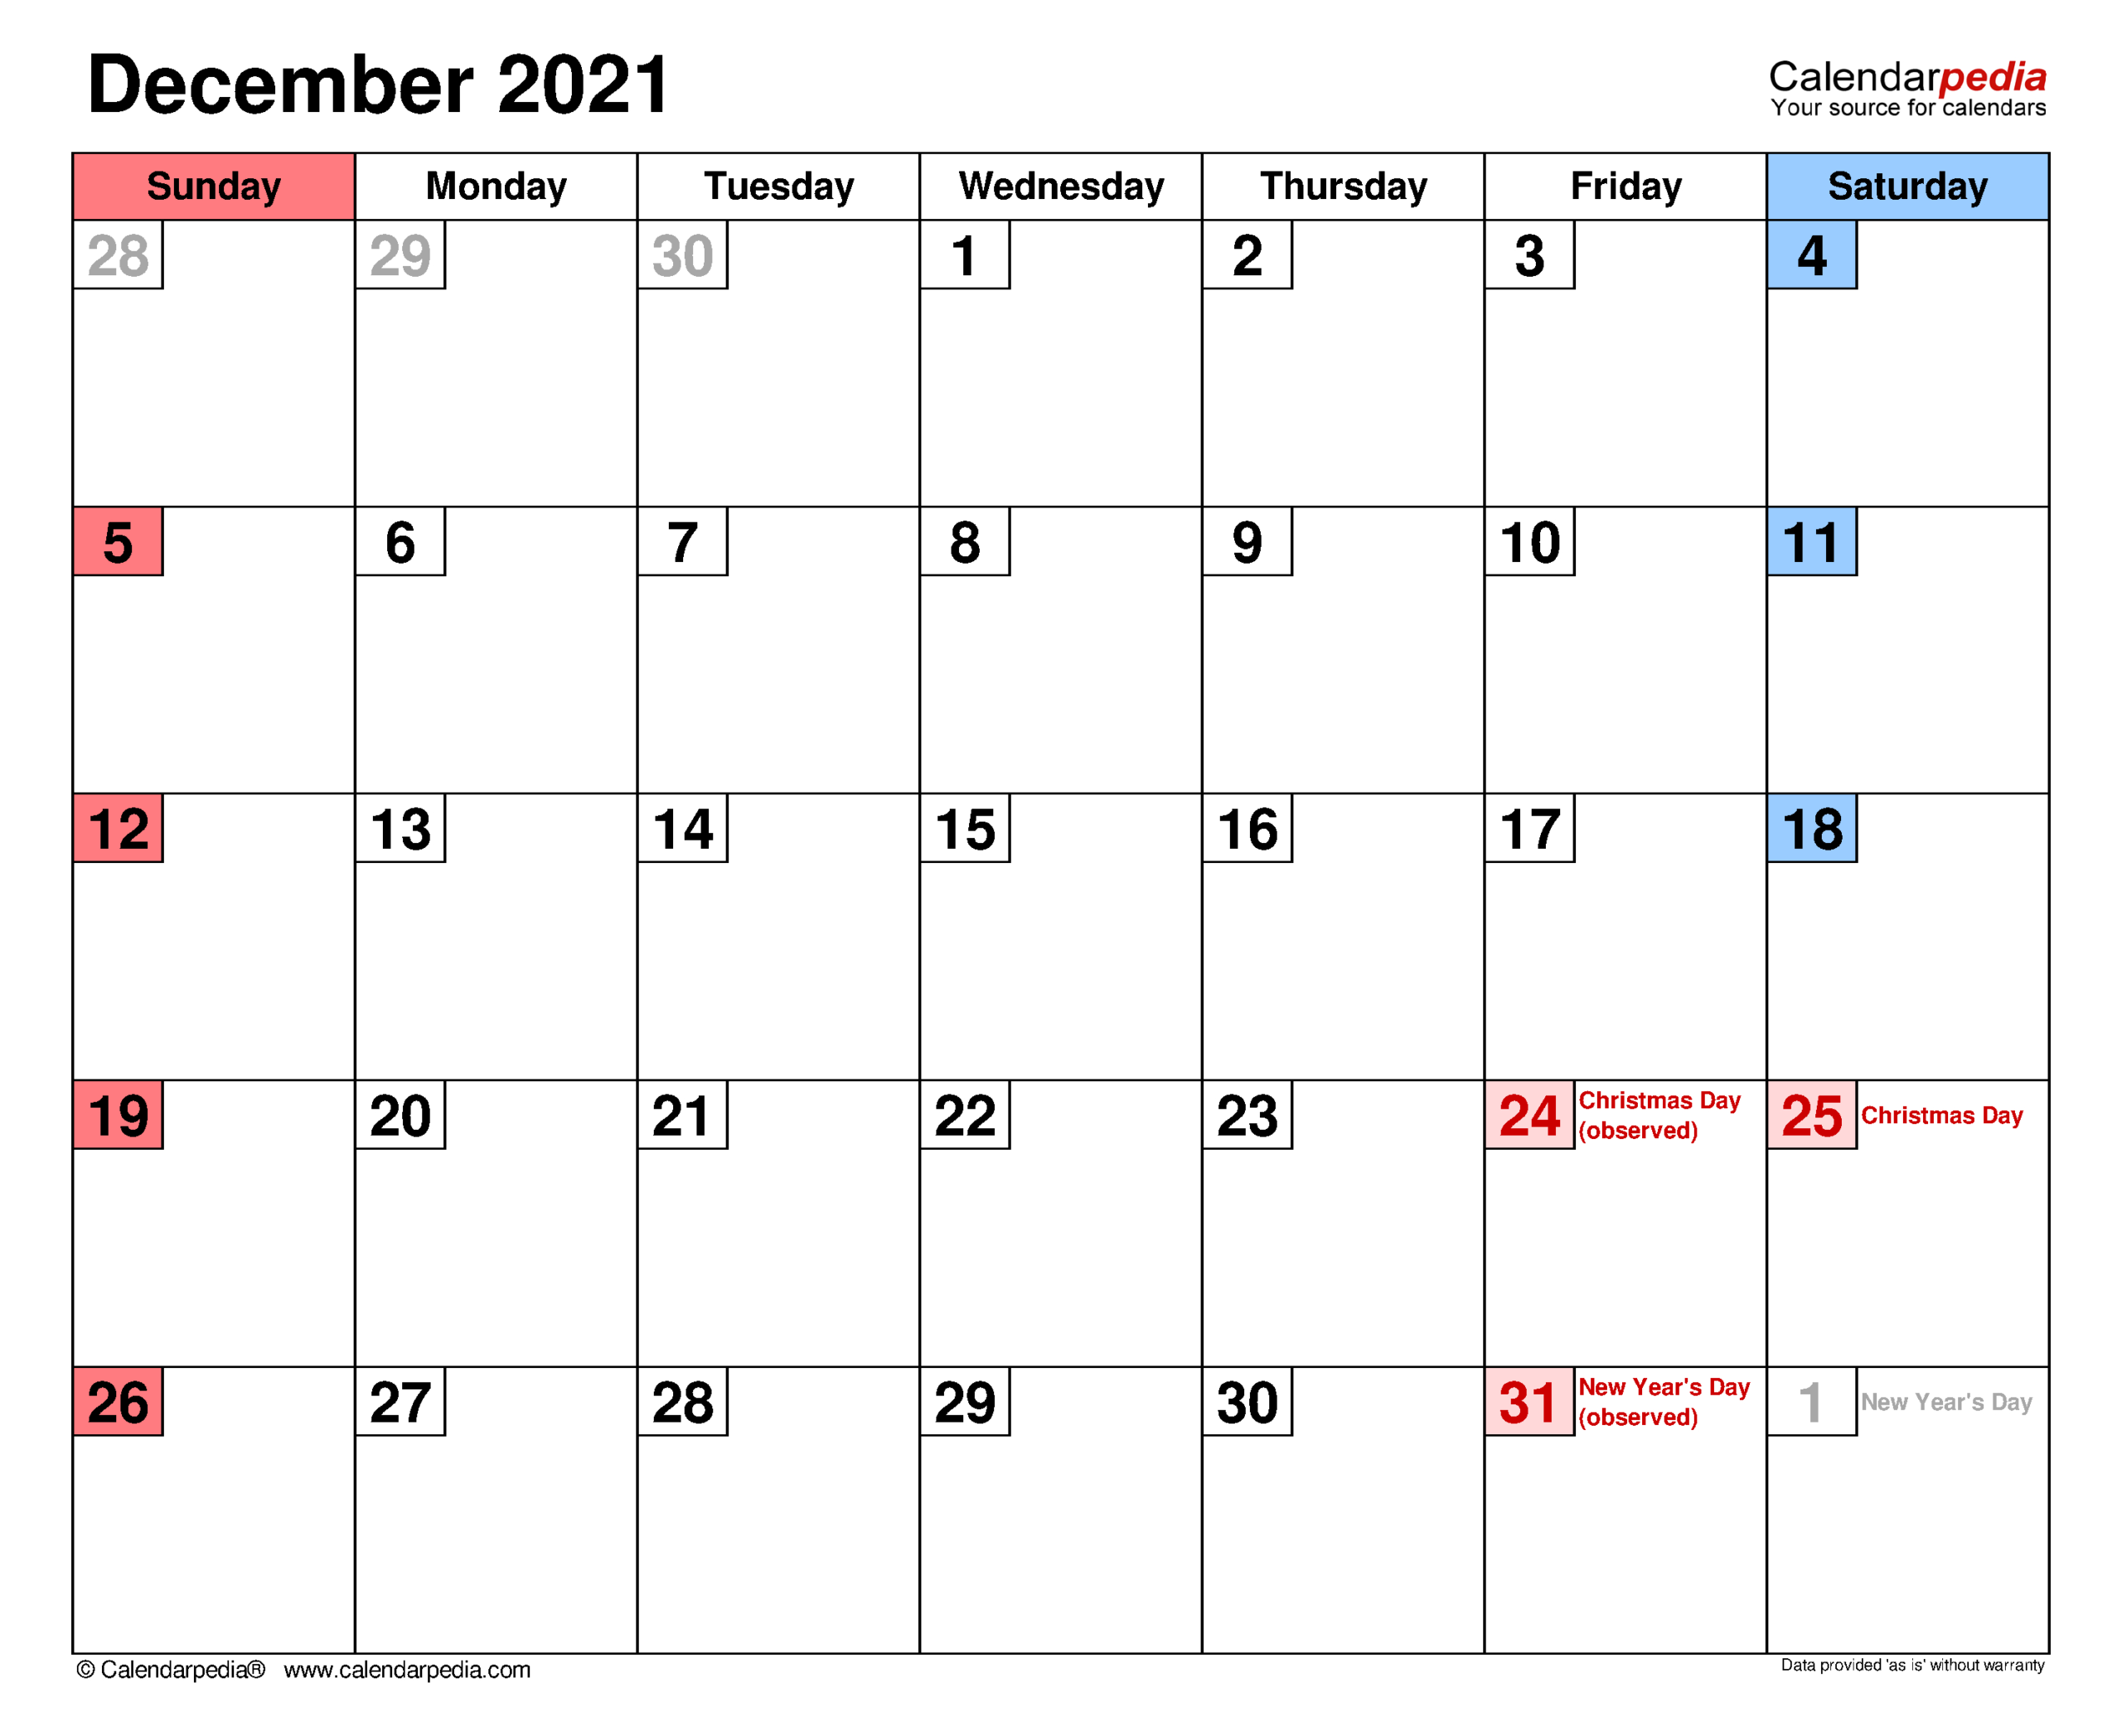 December 2021 Calendar | Templates For Word, Excel And Pdf